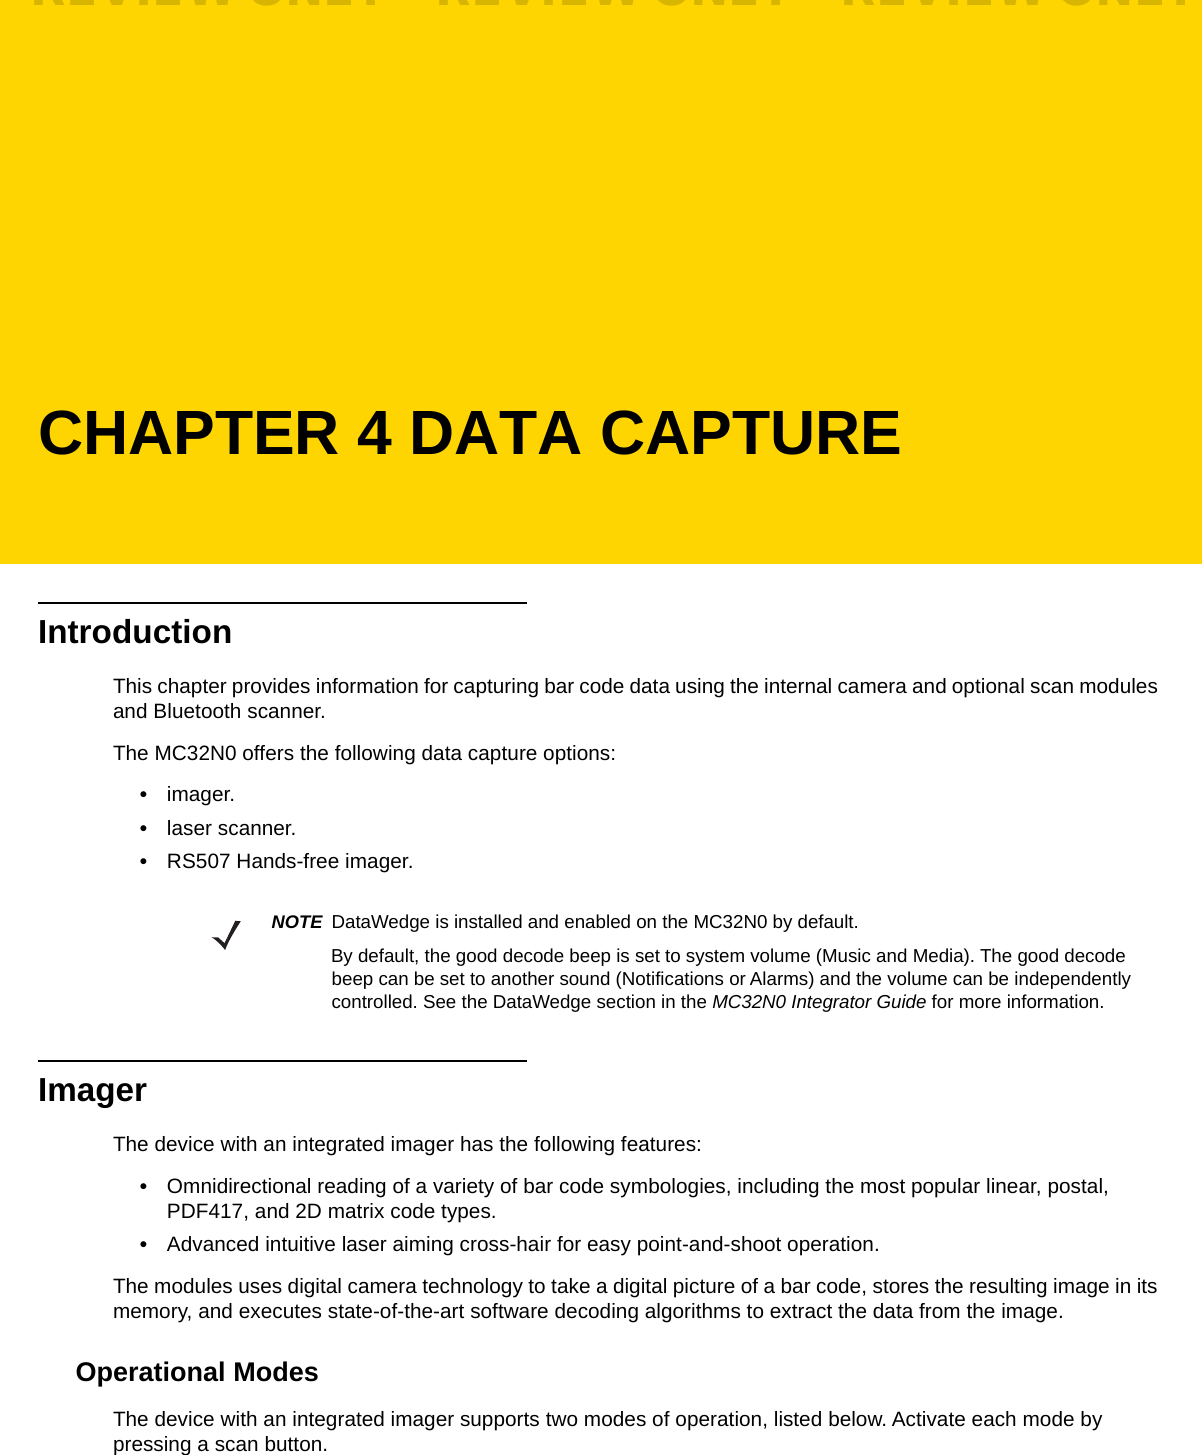 CHAPTER 4 DATA CAPTUREIntroductionThis chapter provides information for capturing bar code data using the internal camera and optional scan modules and Bluetooth scanner.The MC32N0 offers the following data capture options:•imager.•laser scanner.•RS507 Hands-free imager.ImagerThe device with an integrated imager has the following features:•Omnidirectional reading of a variety of bar code symbologies, including the most popular linear, postal, PDF417, and 2D matrix code types.•Advanced intuitive laser aiming cross-hair for easy point-and-shoot operation.The modules uses digital camera technology to take a digital picture of a bar code, stores the resulting image in its memory, and executes state-of-the-art software decoding algorithms to extract the data from the image.Operational ModesThe device with an integrated imager supports two modes of operation, listed below. Activate each mode by pressing a scan button.NOTE DataWedge is installed and enabled on the MC32N0 by default.By default, the good decode beep is set to system volume (Music and Media). The good decode beep can be set to another sound (Notifications or Alarms) and the volume can be independently controlled. See the DataWedge section in the MC32N0 Integrator Guide for more information.REVIEW ONLY - REVIEW ONLY - REVIEW ONLY                             REVIEW ONLY - REVIEW ONLY - REVIEW ONLY